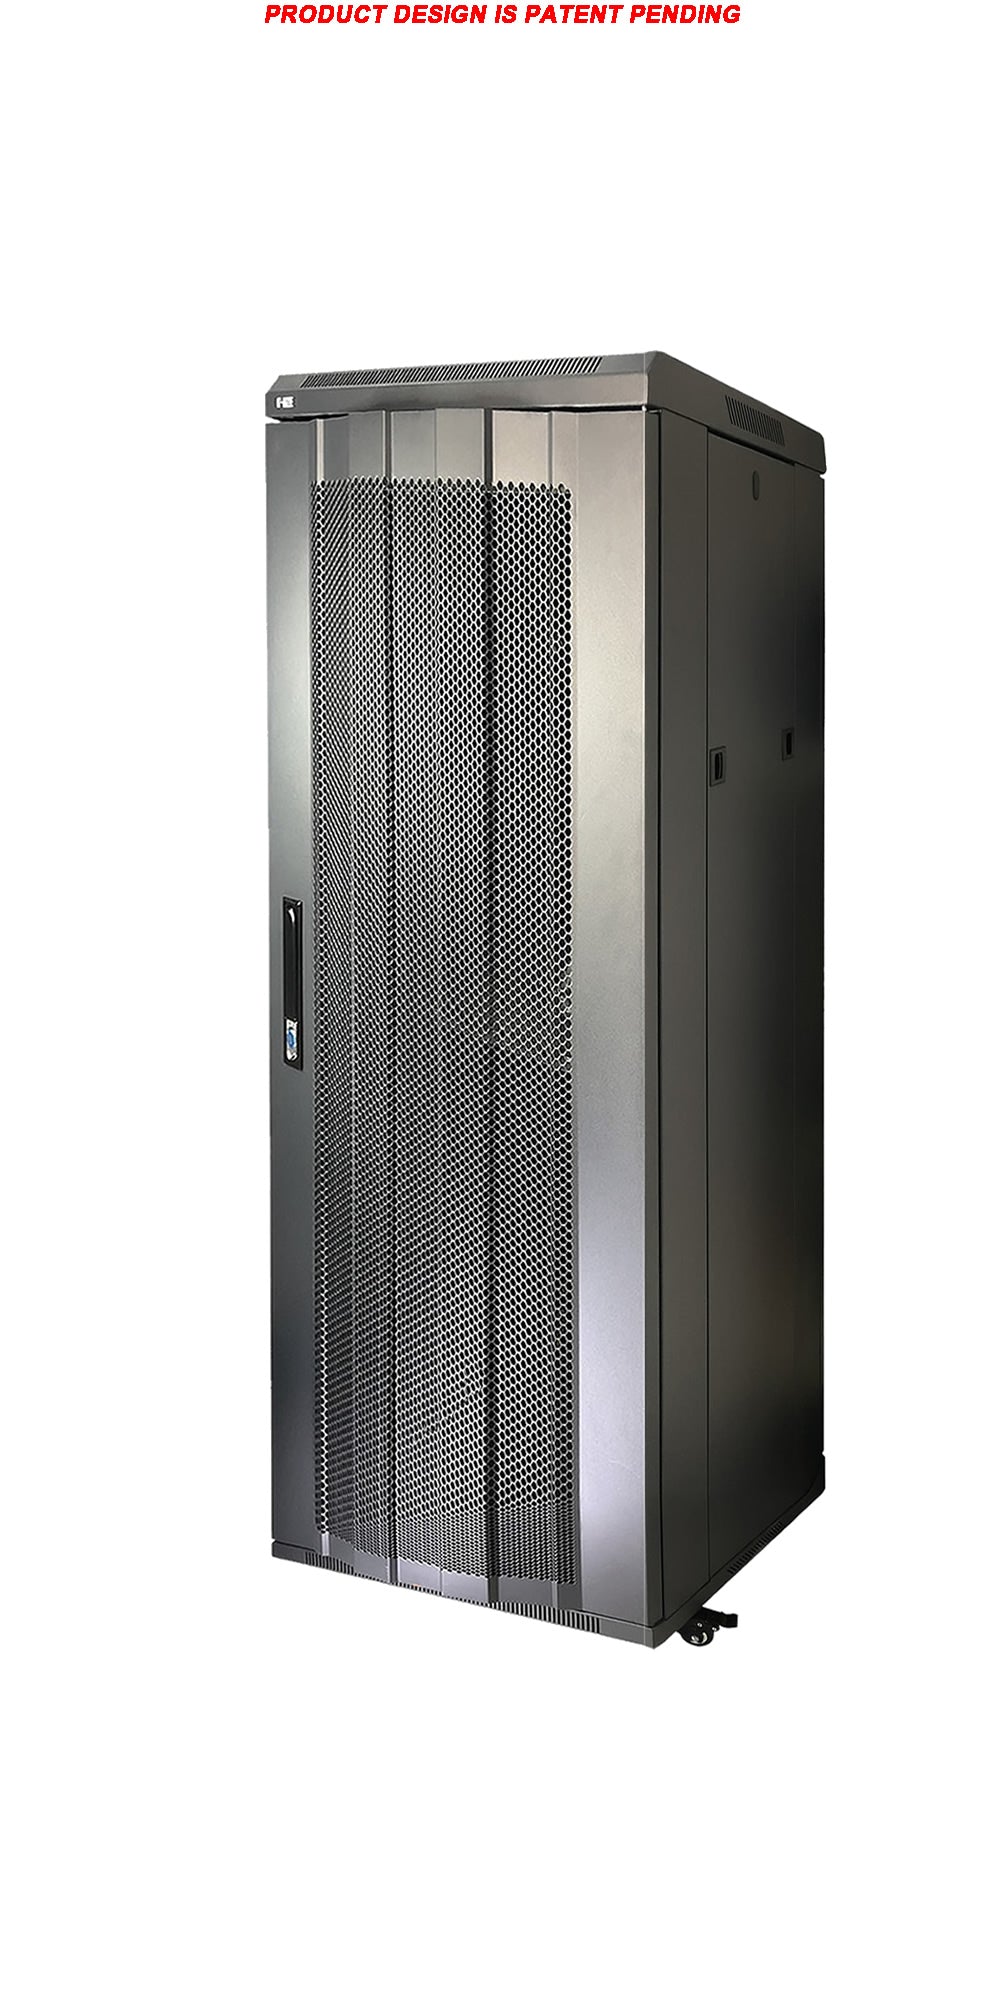 07-6622E 22U Stand Server / Network Cabinet - Extra Deep, Locking Metal Door and Casters with Brake